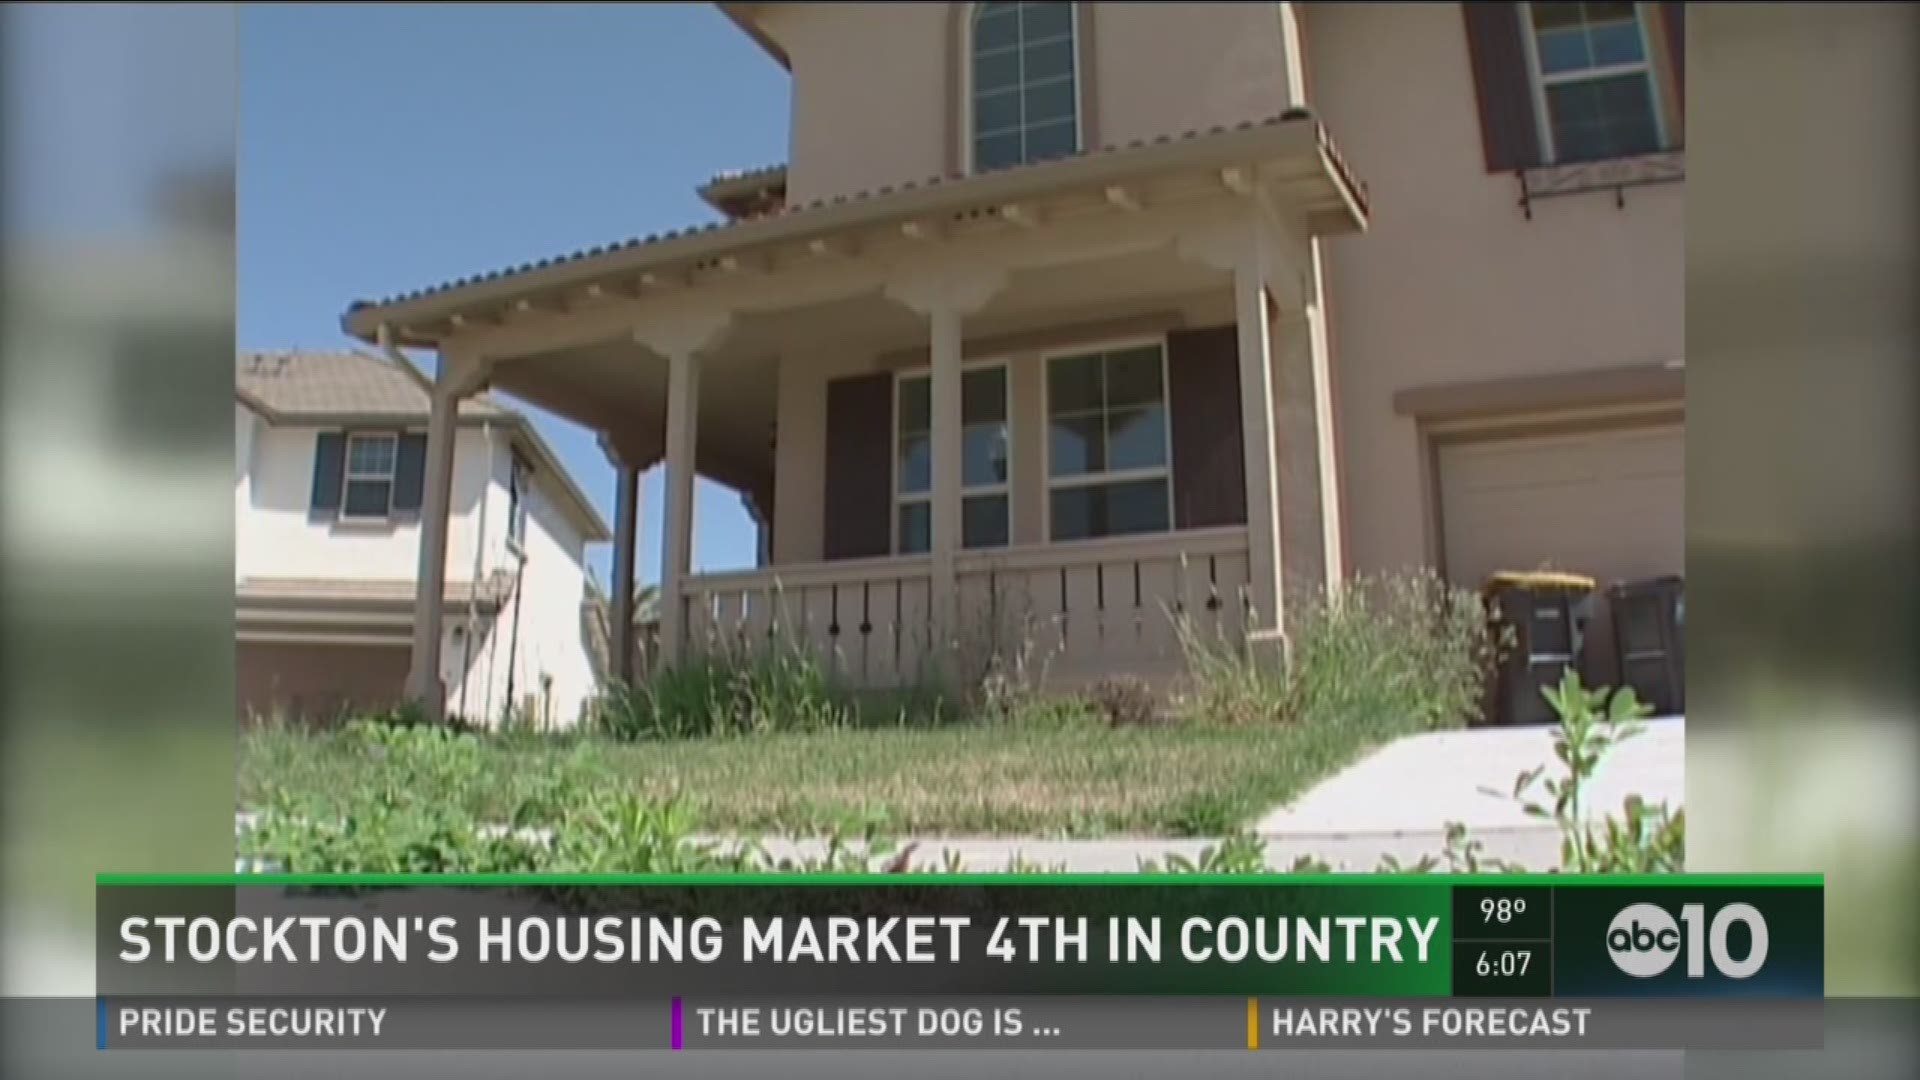 Housing crisis in Stockton on the rise. (June 25, 2016)